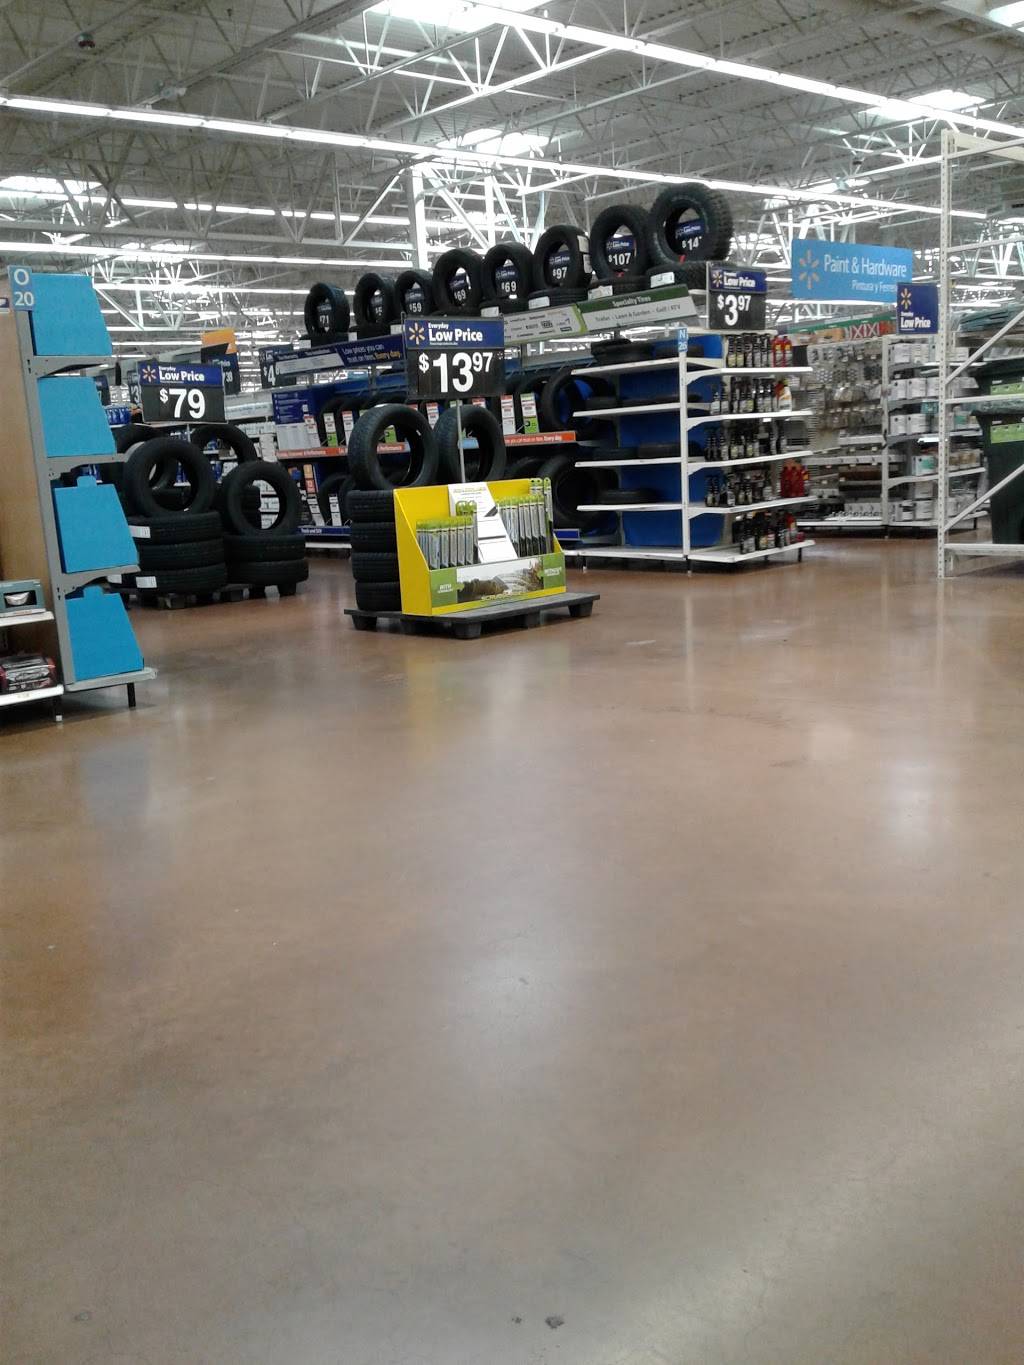 Walmart Auto Care Centers | 3400 Steelyard Dr, Cleveland, OH 44109, USA | Phone: (216) 661-5503